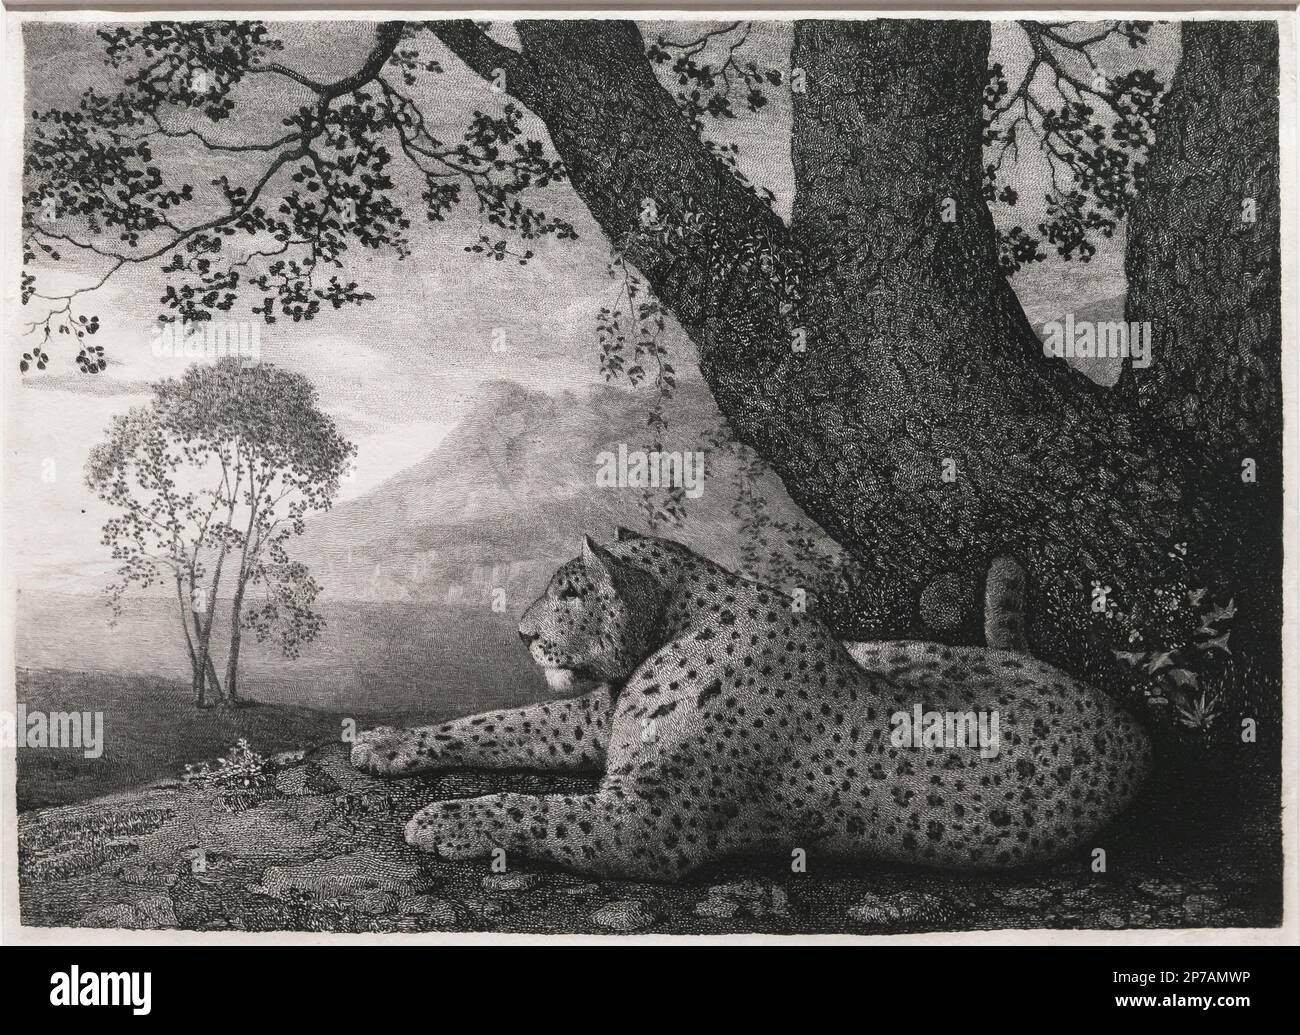 A Tyger, A Recumbent Leopard by a Tree, George Stubbs, 1788, Art Institute of Chicago, Chicago, Illinois, USA, North America, Stock Photo